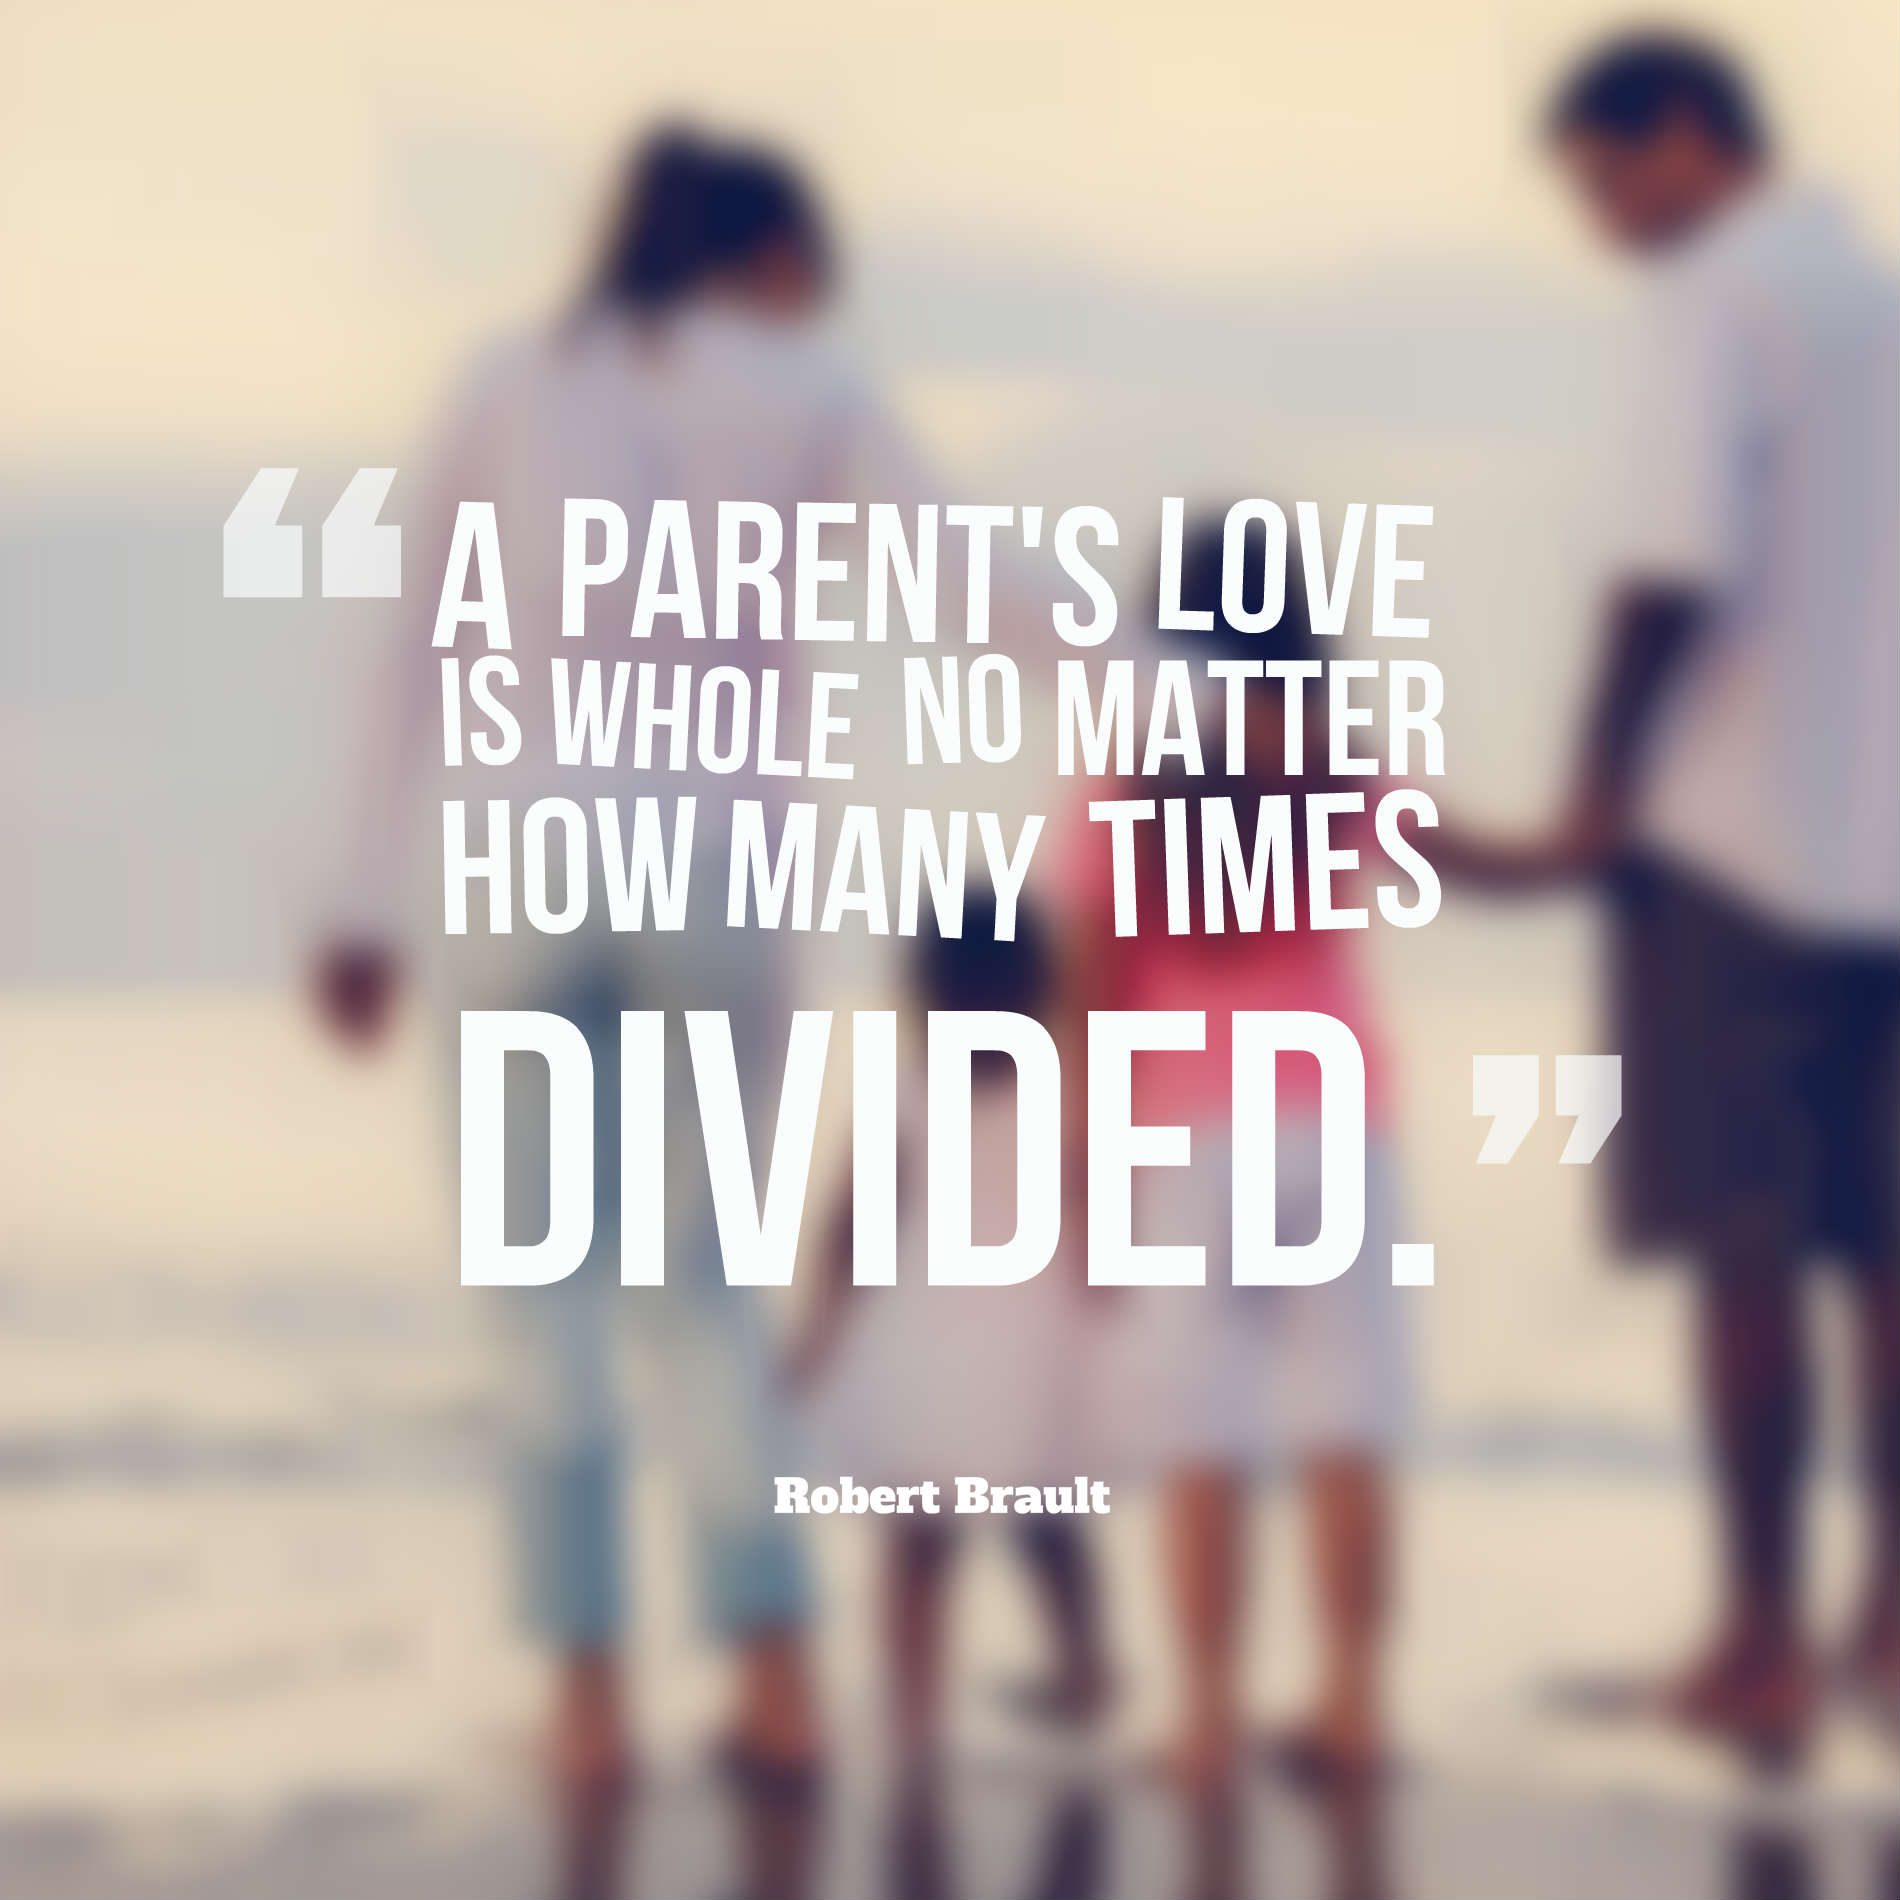 A parent's love is whole no matter how many times divided.